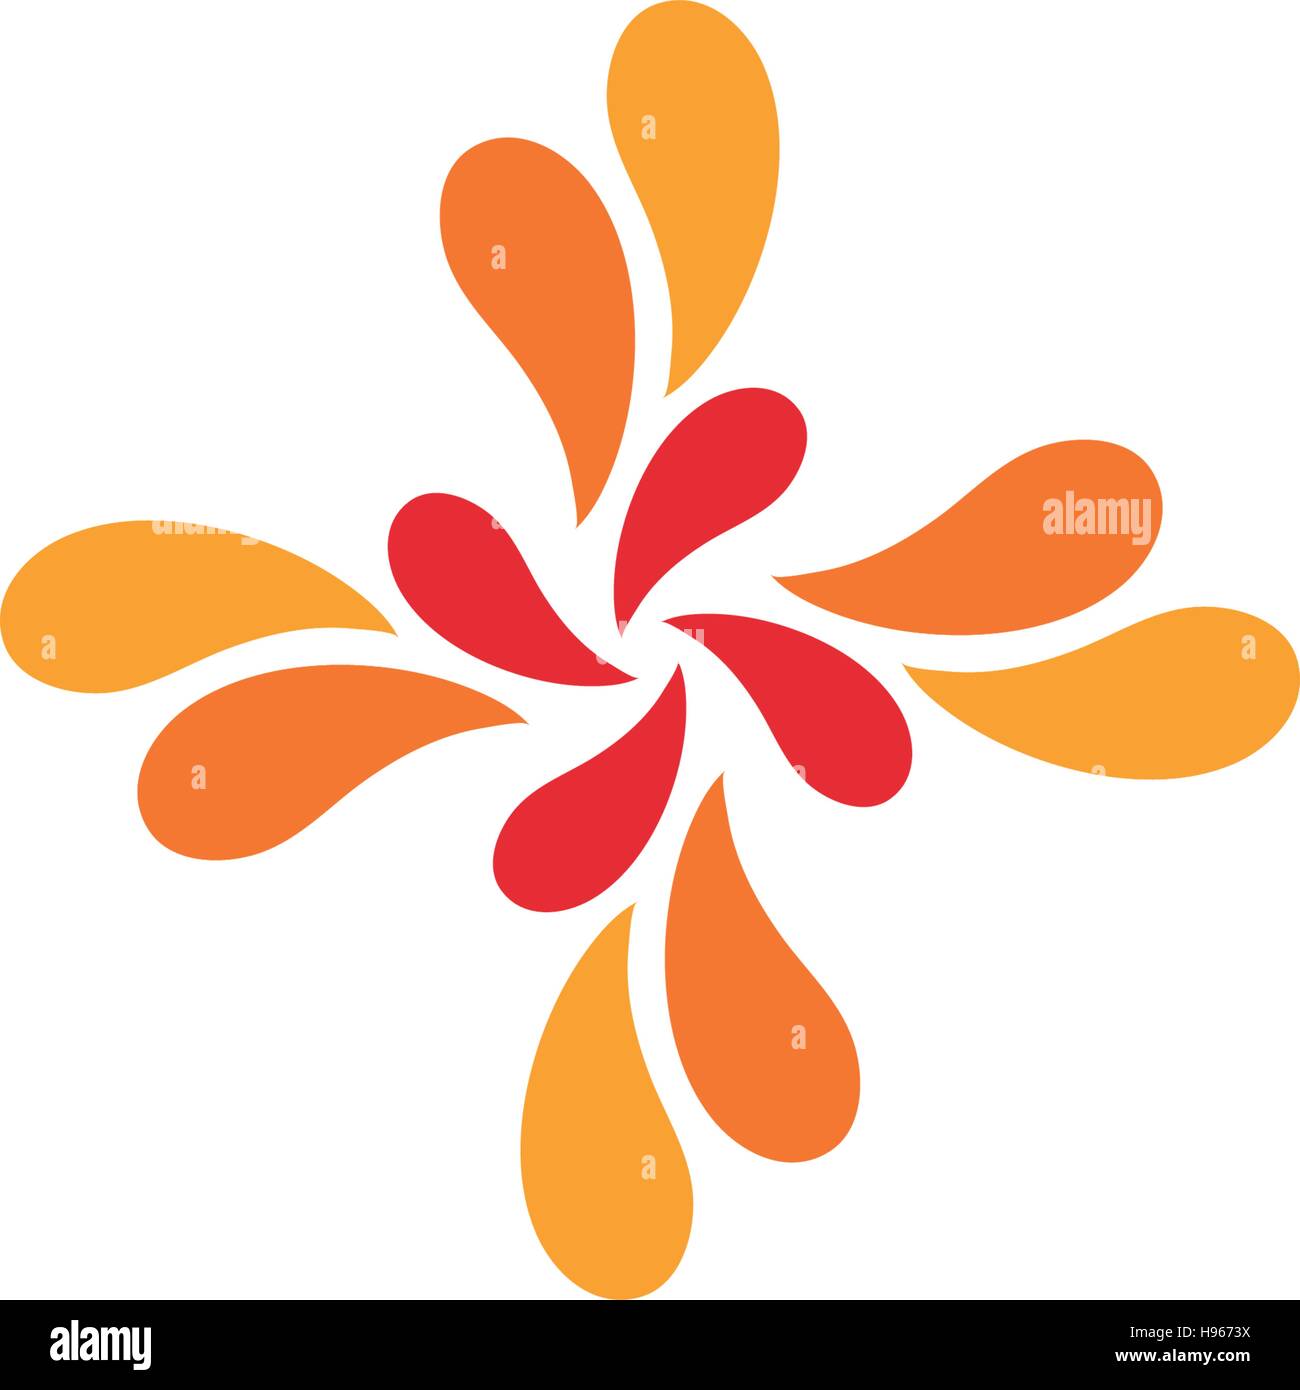 Isolated abstract red and orange cross vector logo. Medical logotype. Flower petals illustration. Floral decorative element. Clinic  hospital emblem. Natural products icon. Stock Vector